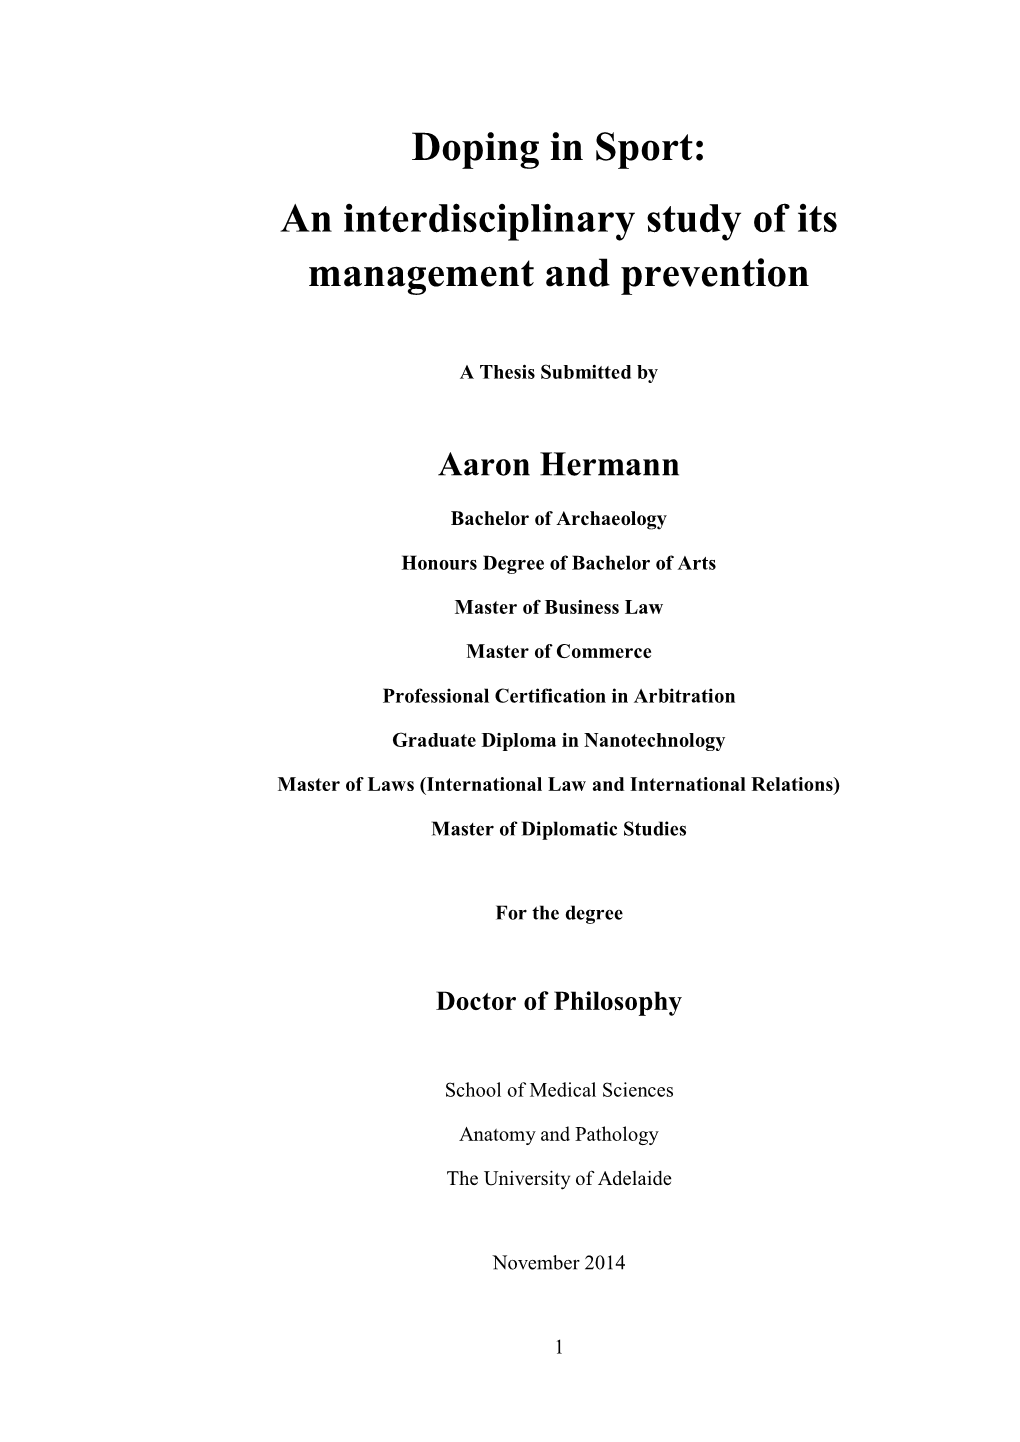 Doping in Sport: an Interdiscipliary Study of Its Management And